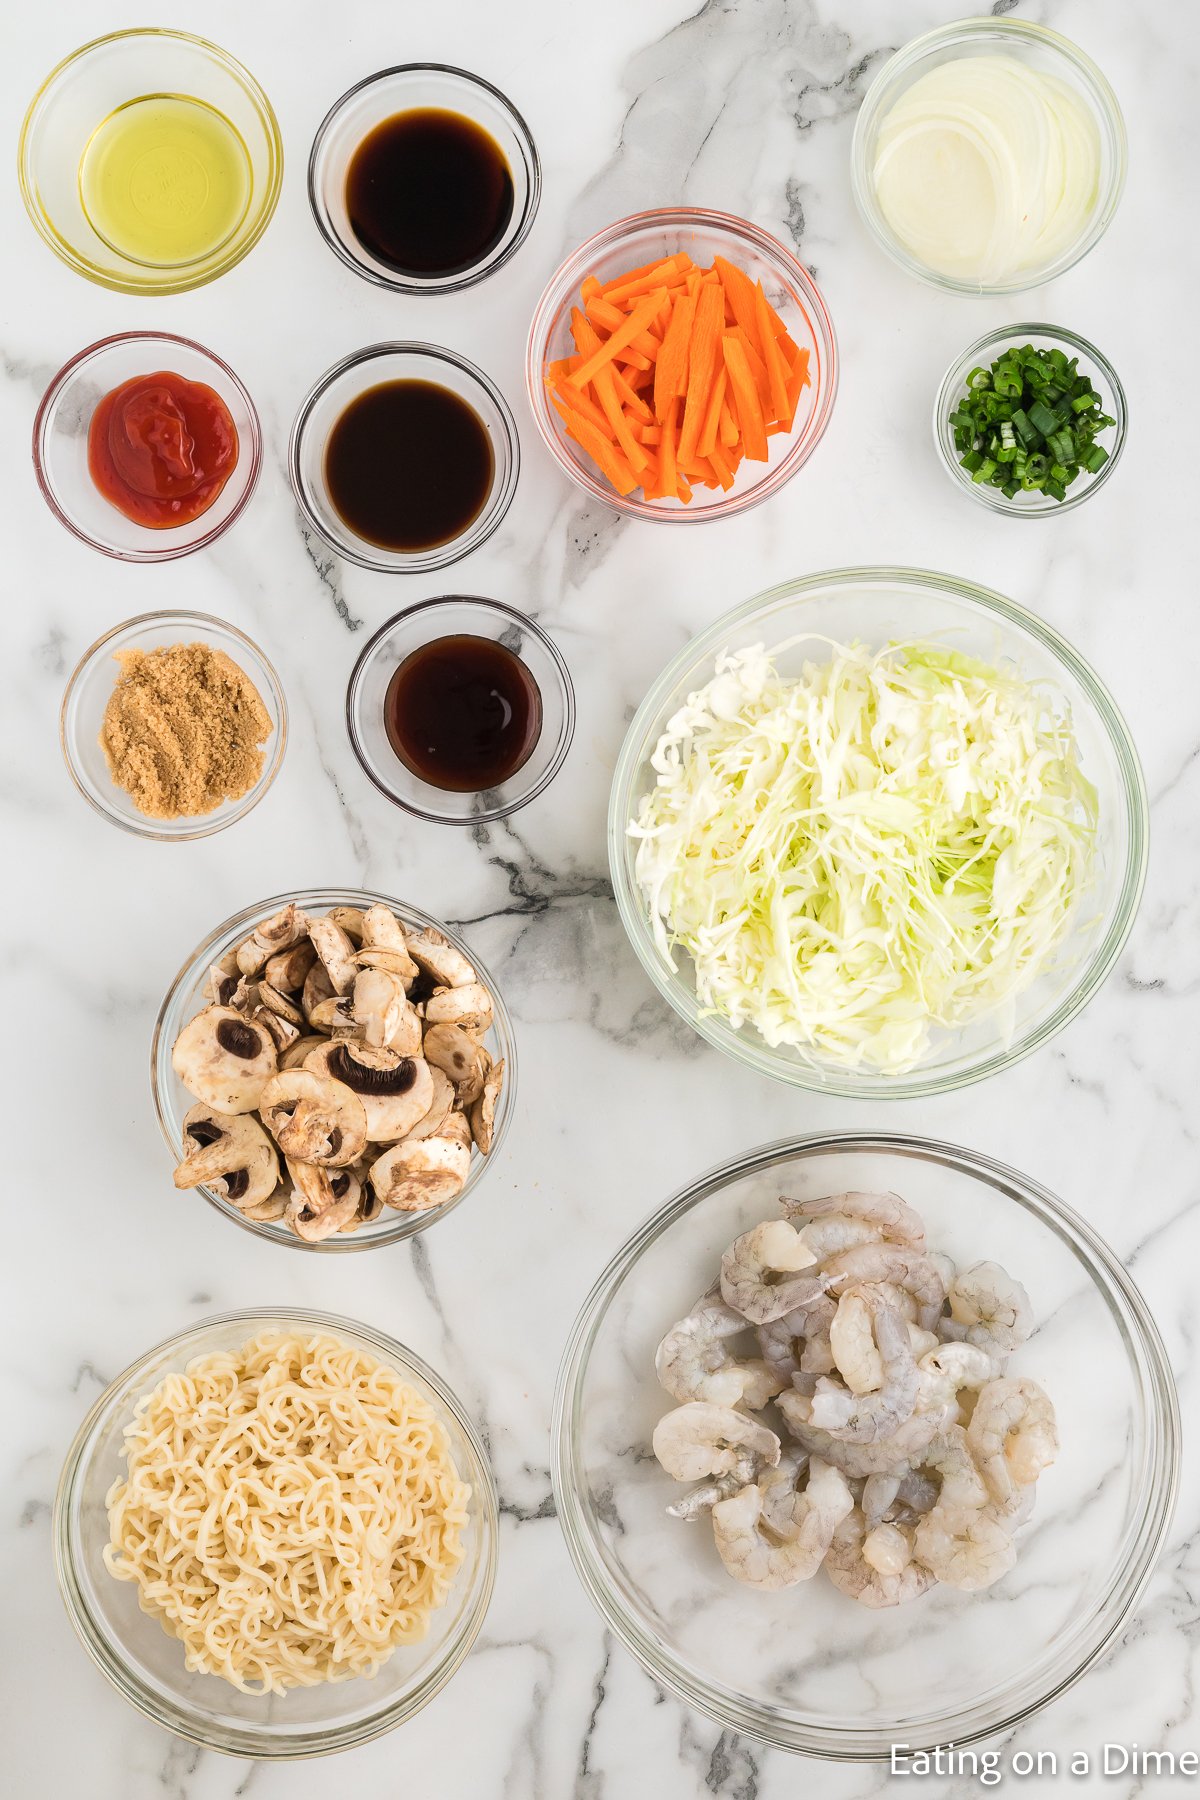 ingredients needed for shrimp yakisoba - worcestershire sauce, oyster sauce, ketchup, soy sauce, brown sugar, avocado oil, shrimp yakisoba noodles, onion, carrot, green cabbage, green onions, slice mushrooms